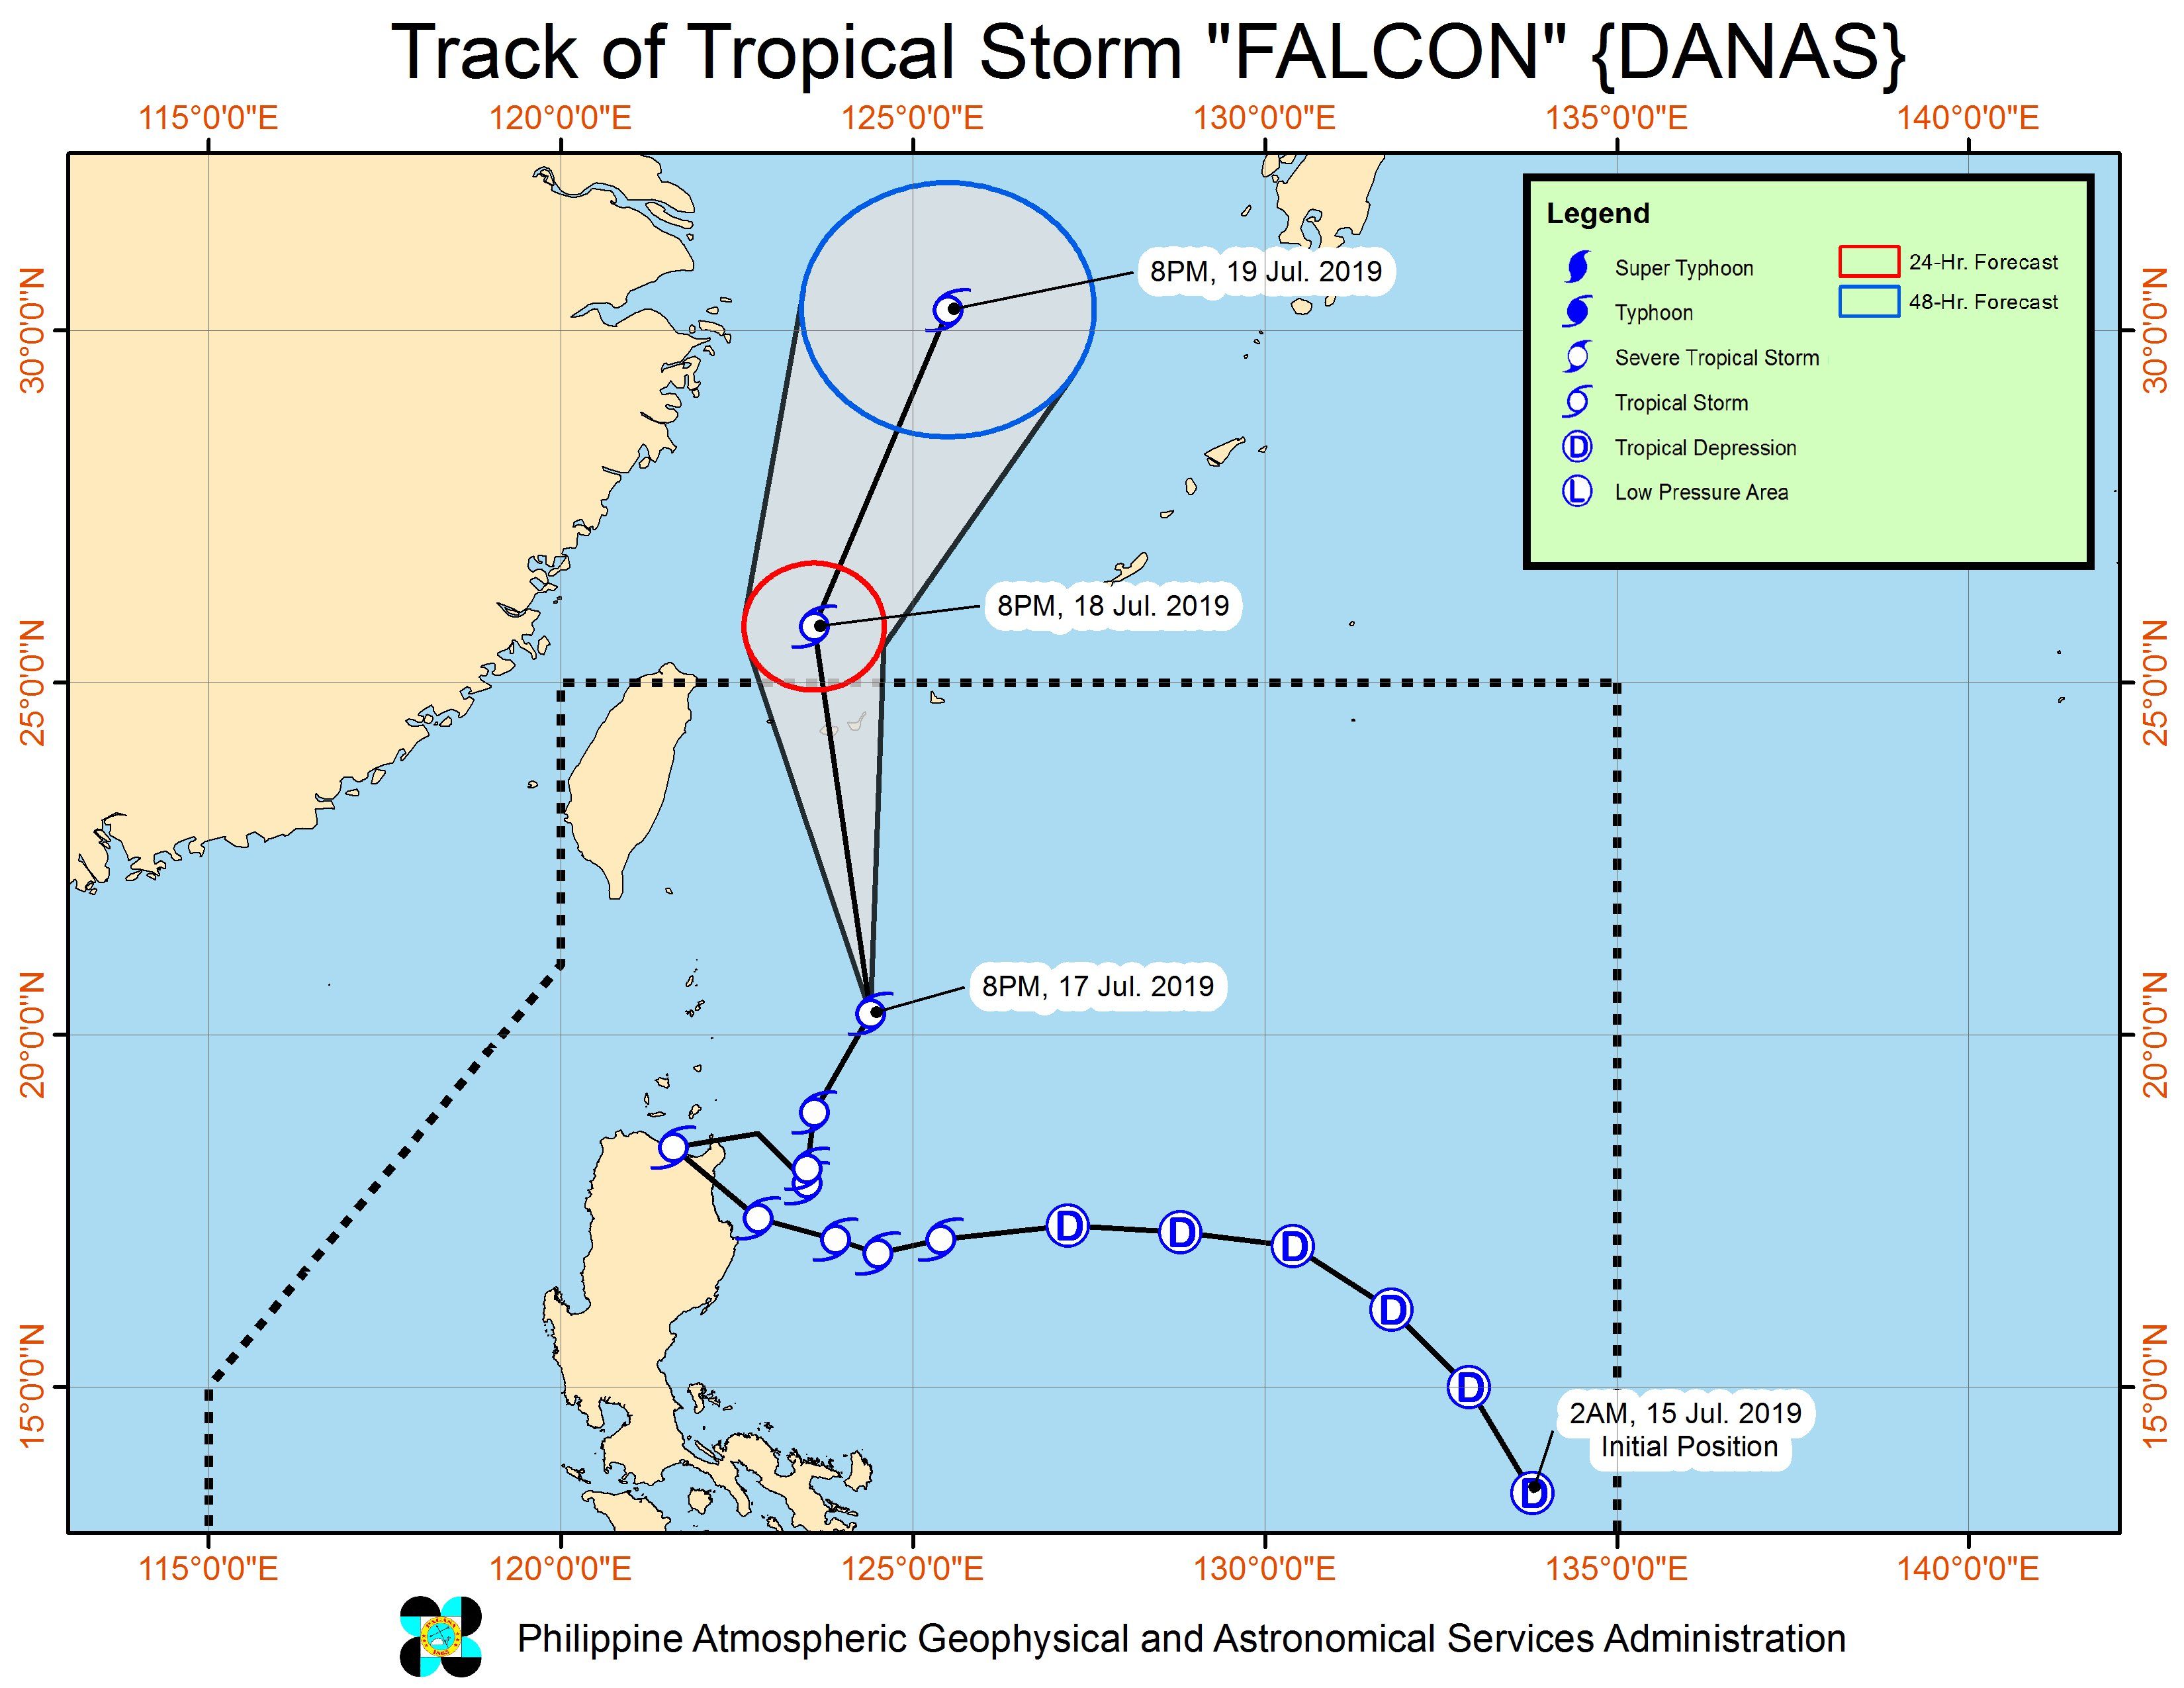 Forecast track of Tropical Storm Falcon (Danas) as of July 17, 2019, 11 pm. Image from PAGASA 